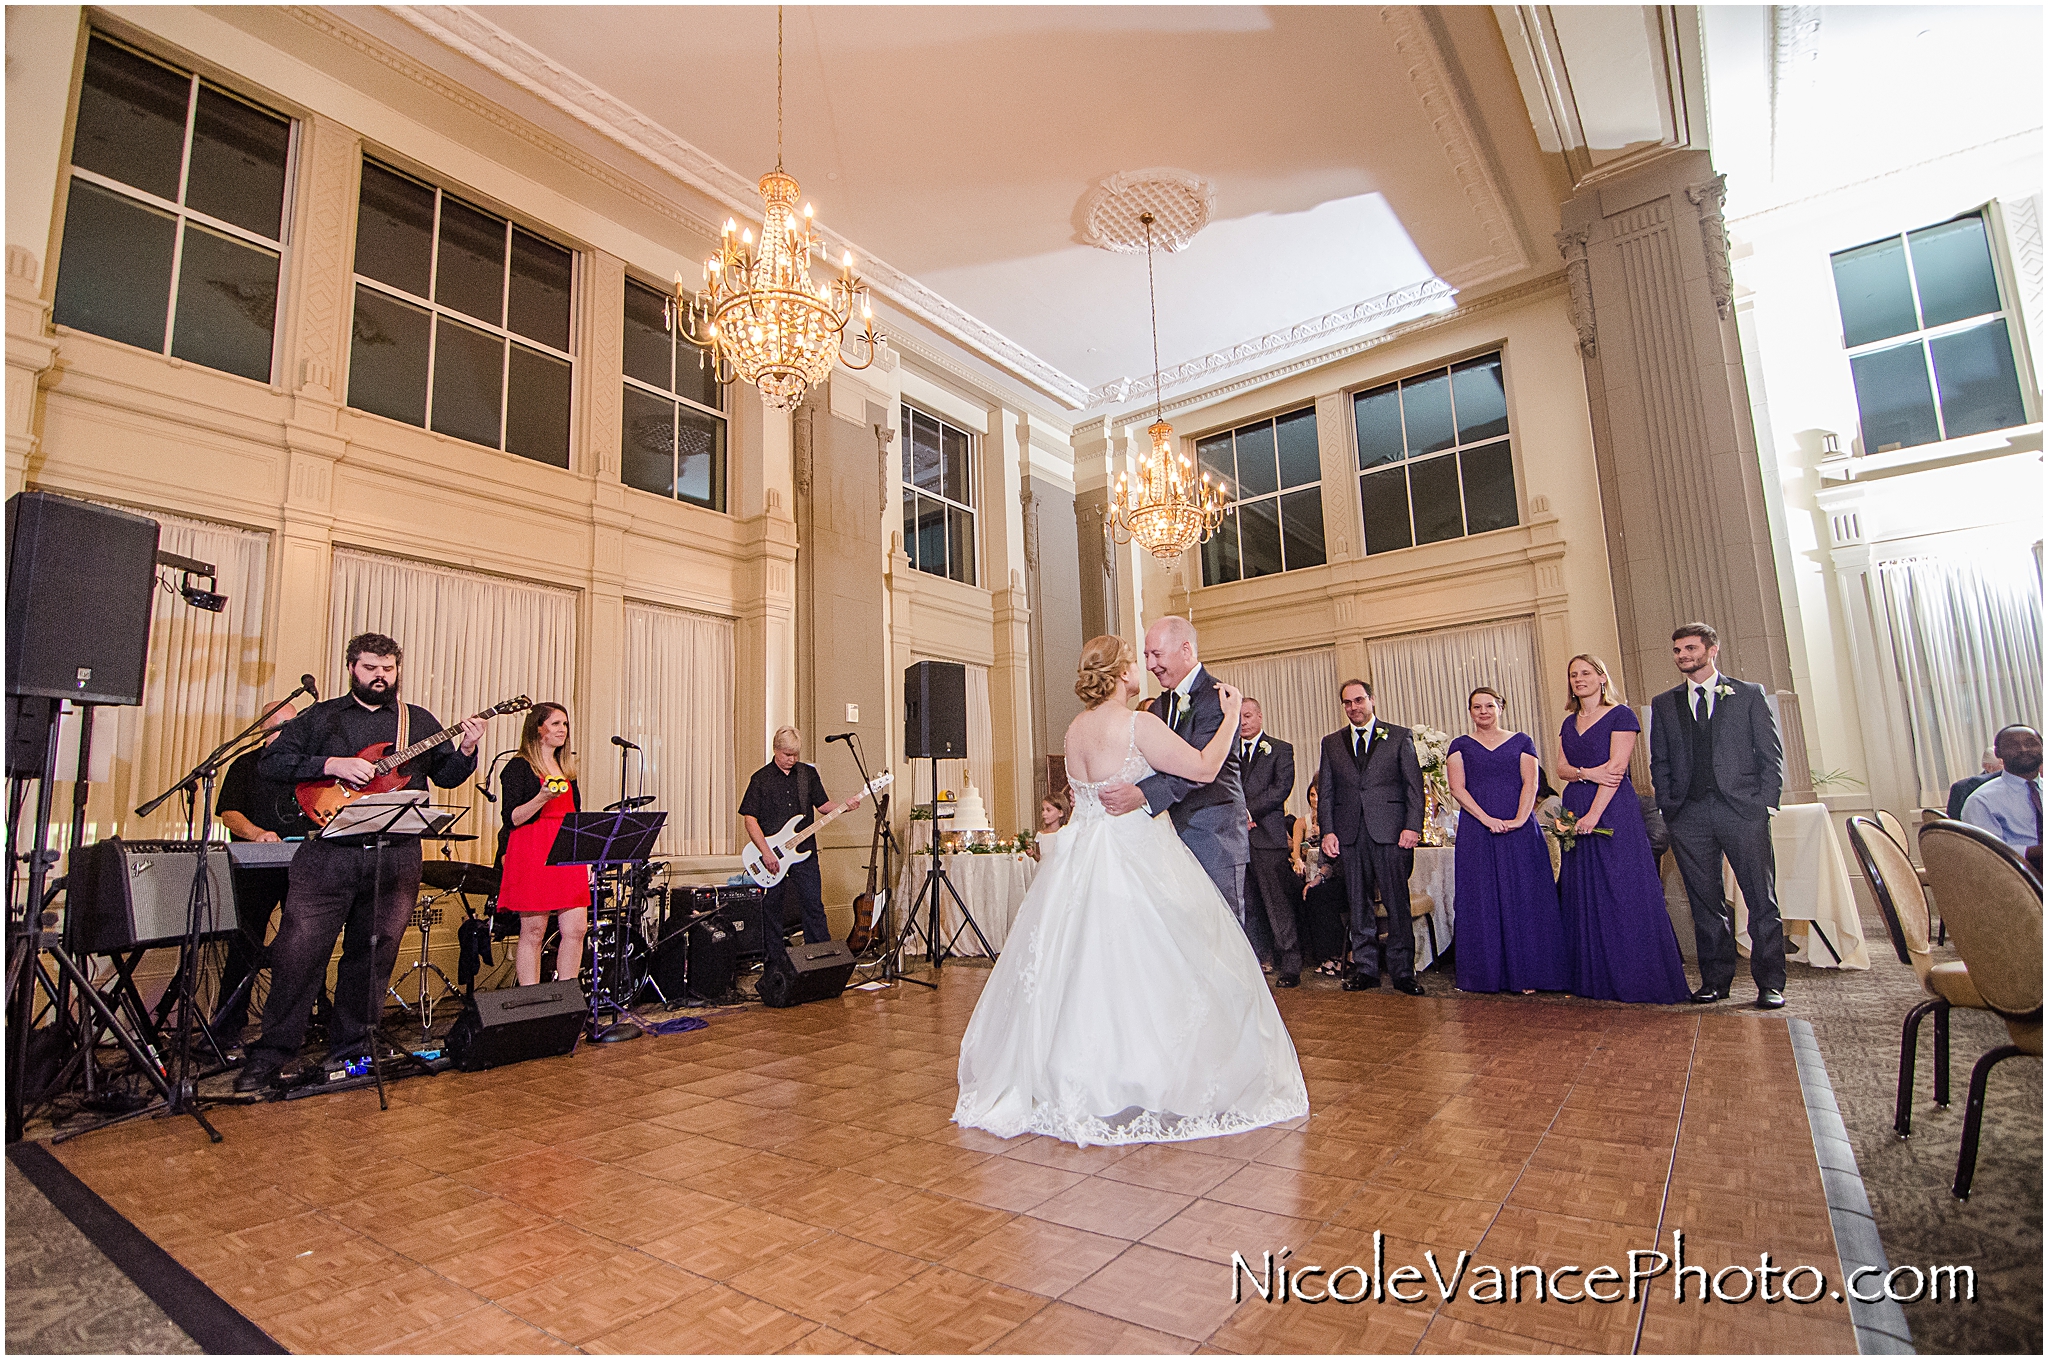 Barbara and Jerry enjoy their first dance at the Hotel John Marshall.